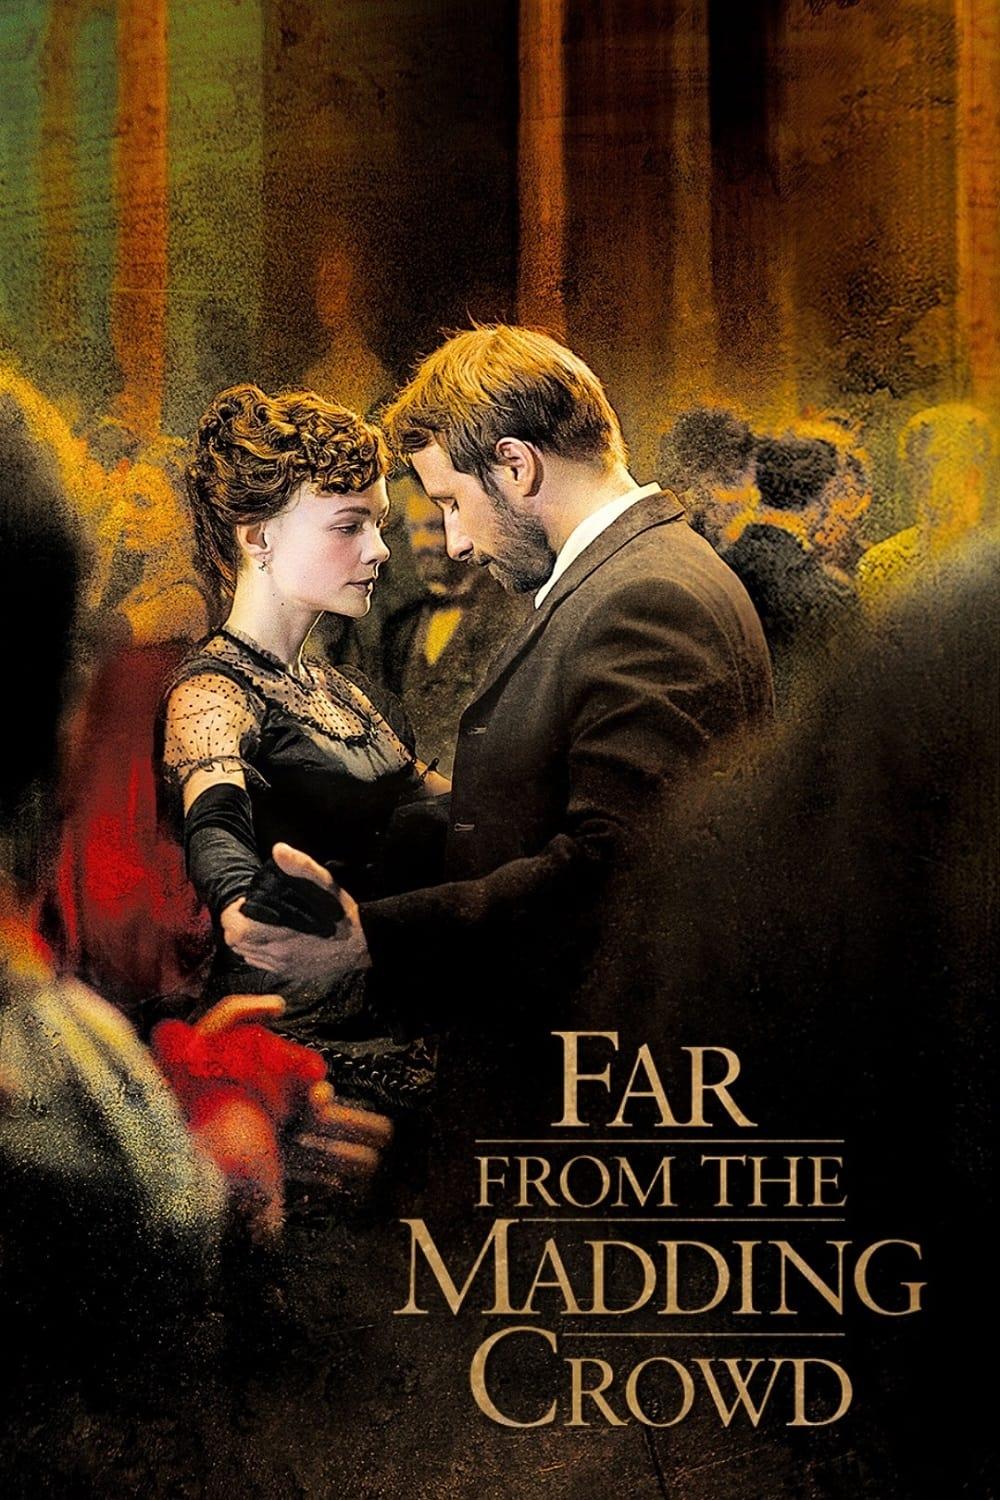 Far from the Madding Crowd poster